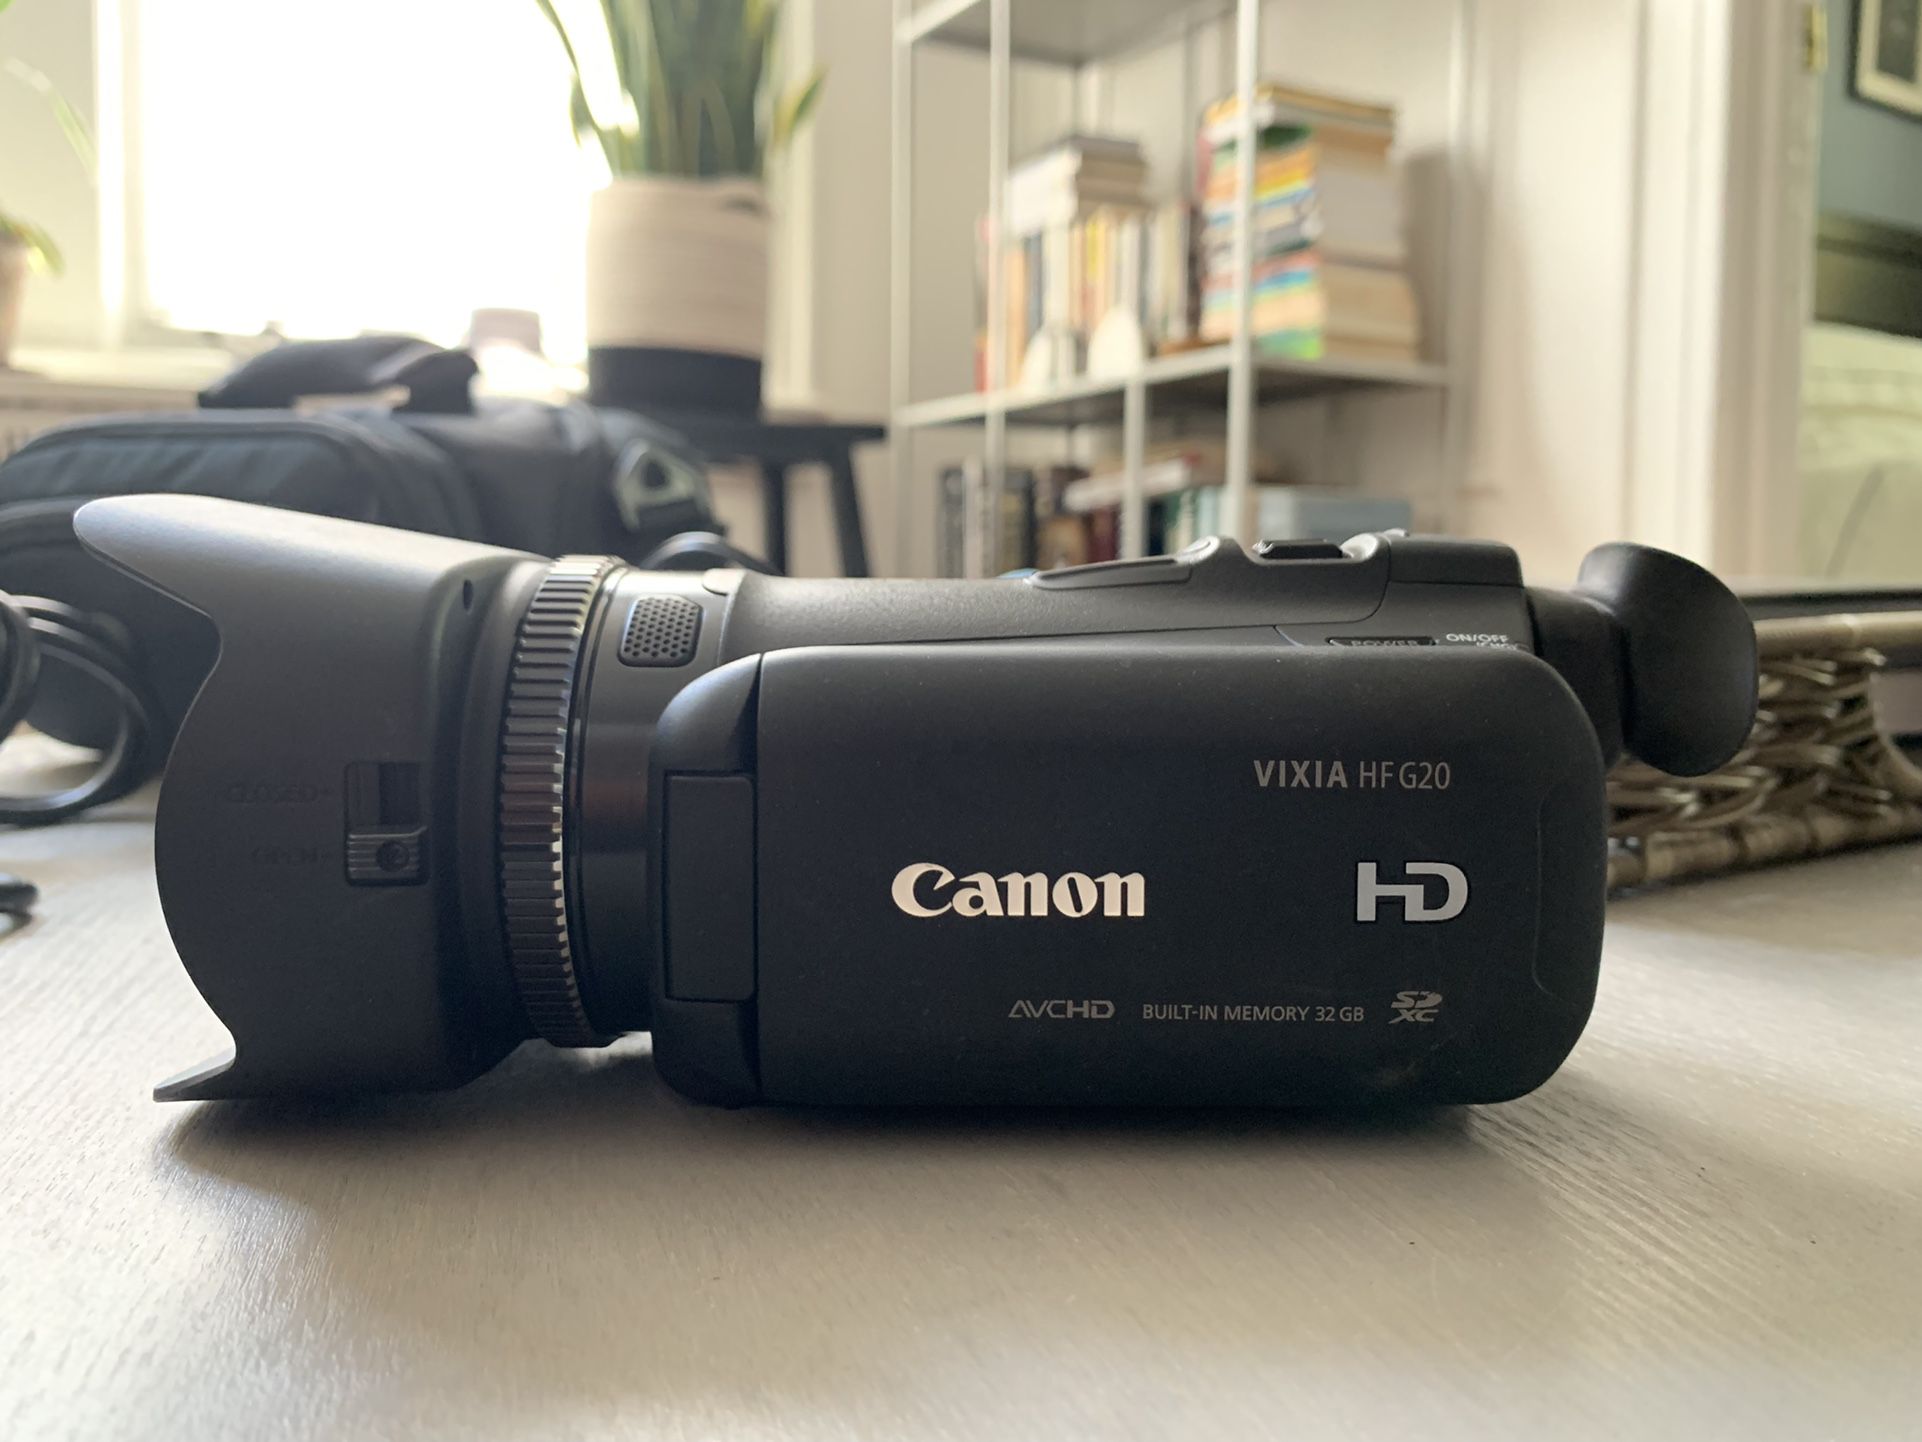 Canon Vixia HF G20 - Camcorder for Sale in Queens, NY - OfferUp